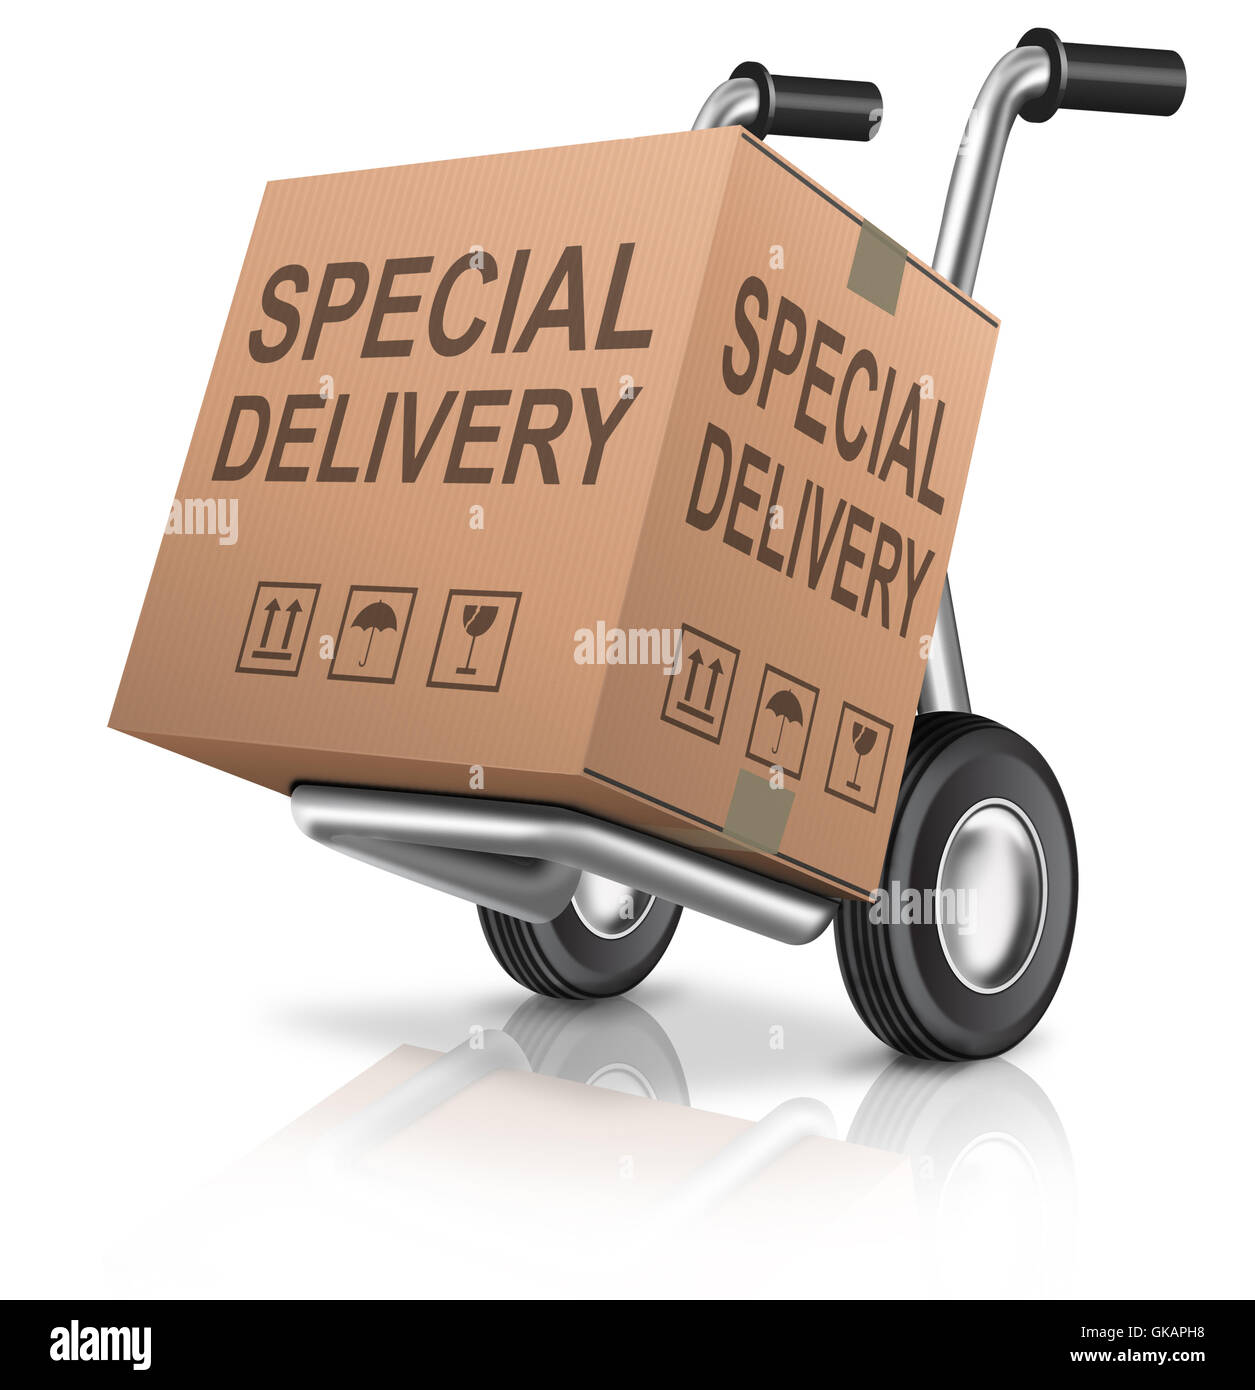 Express Shipping High Resolution Stock Photography and Images - Alamy